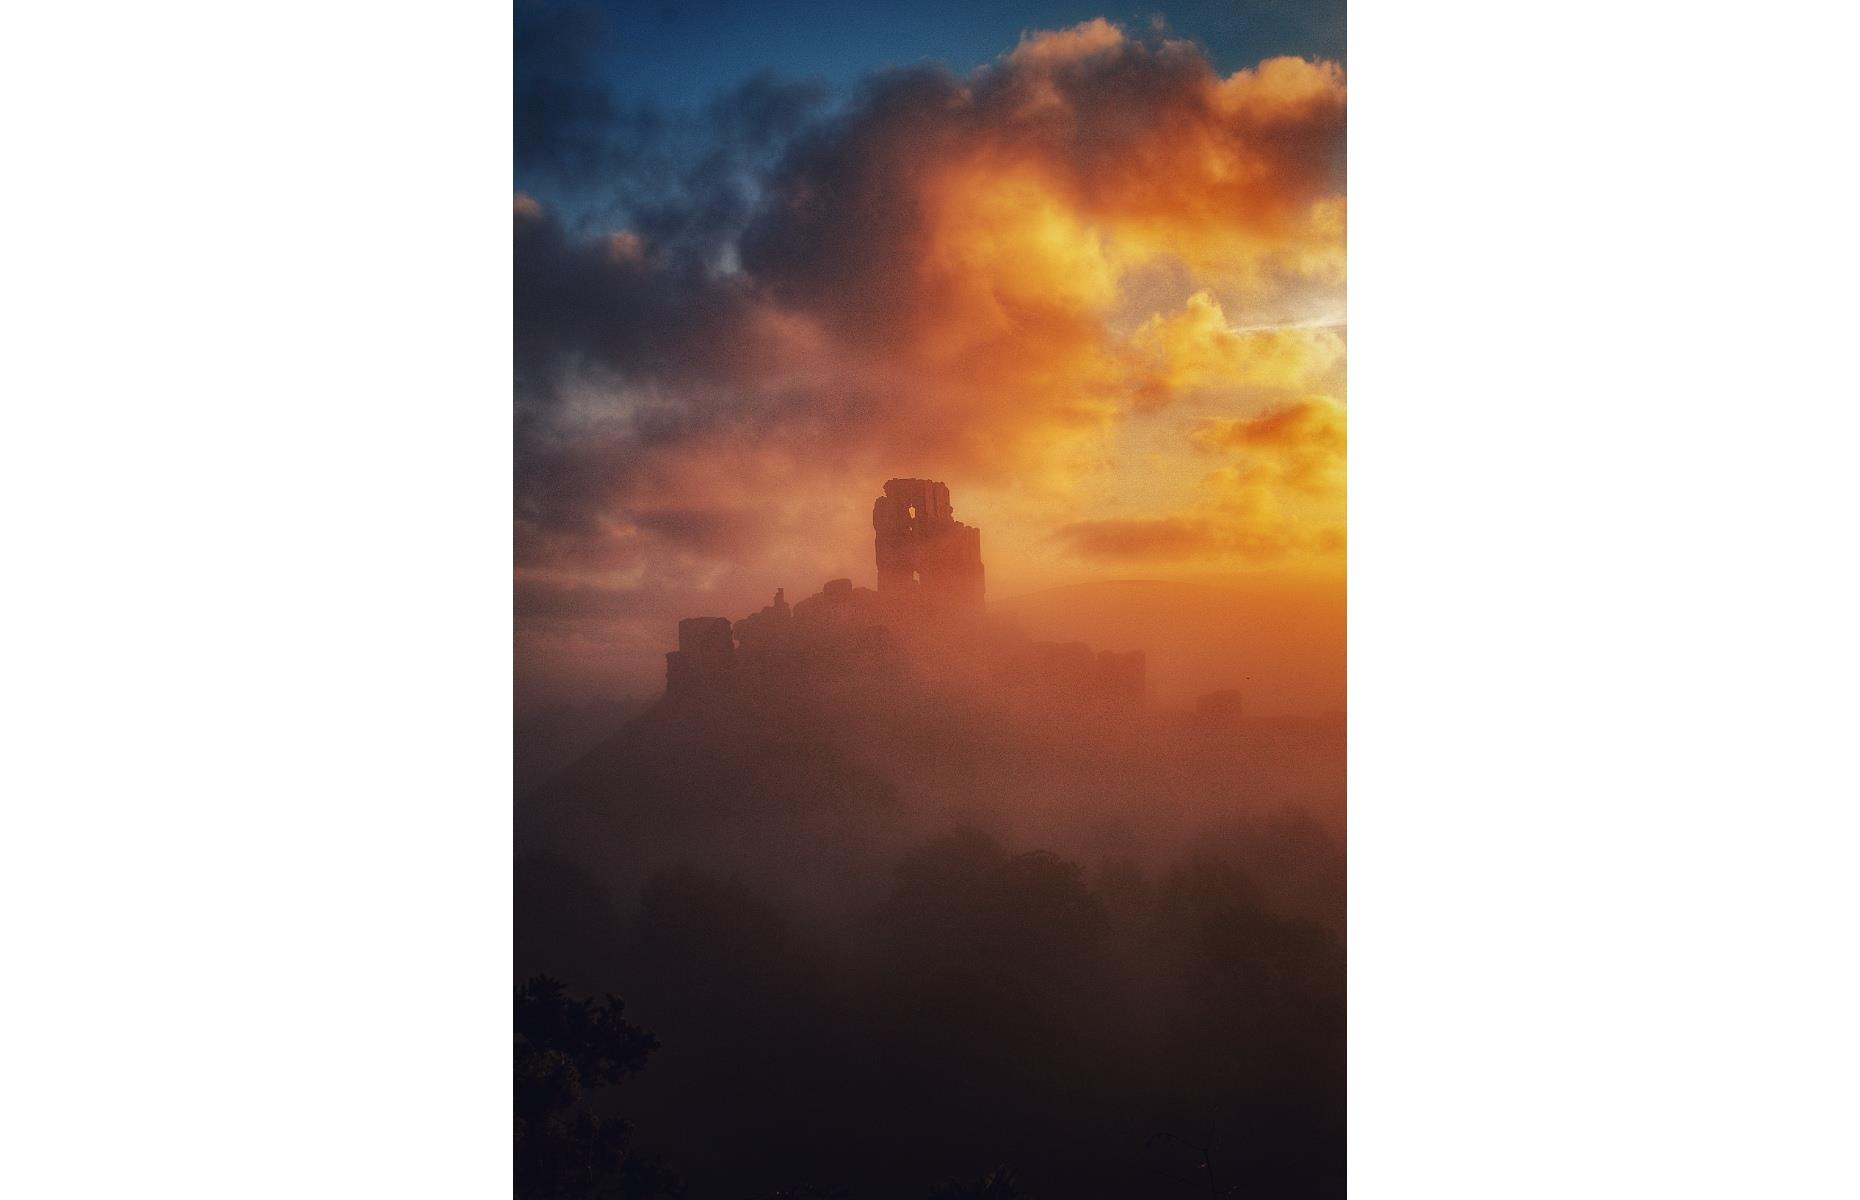 Corfe Castle is such a hotspot for photographers that two entries on the shortlist feature the historic landmark, although the photographs are starkly different. In contrast with the soft, golden tones of Edyta Rice's image, this shot by Keith Musselwhite features bright clouds which glow with a range of orange, indigo and scarlet hues at sunrise, adding to the drama of the composition.